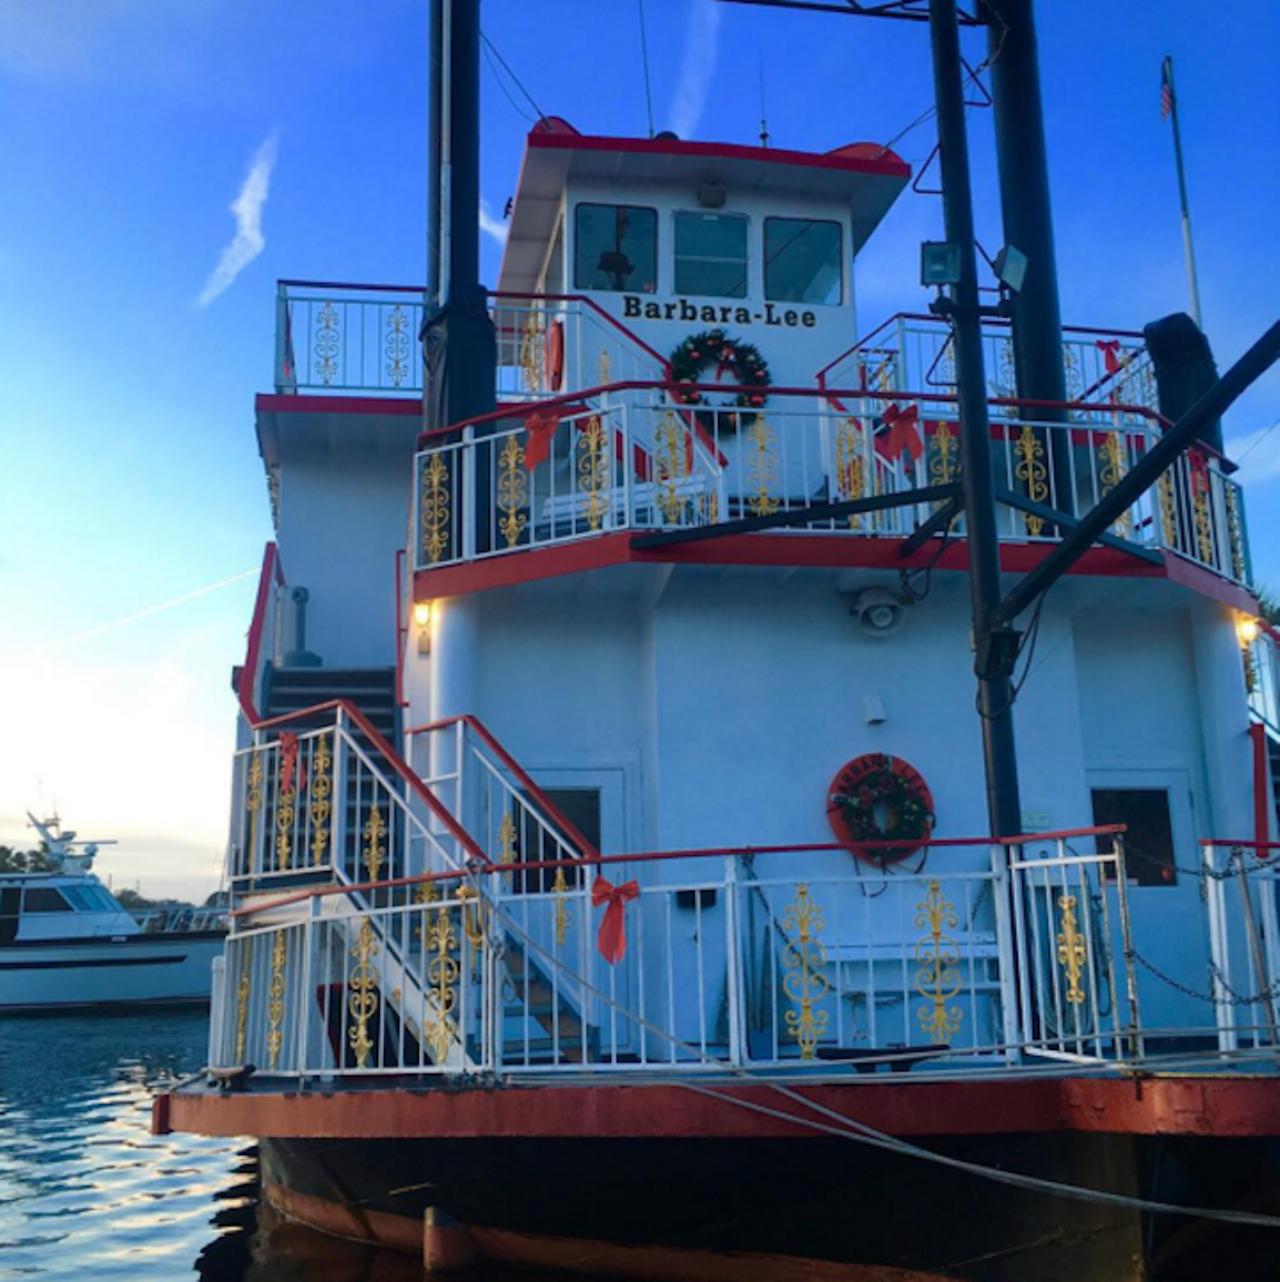 8. Catch a ride on the St. Johns Rivership Co. boat
Unless you want to fall off, you might want to avoid doing this Titanic style.
Photo via sketchup_orlando/Instagram